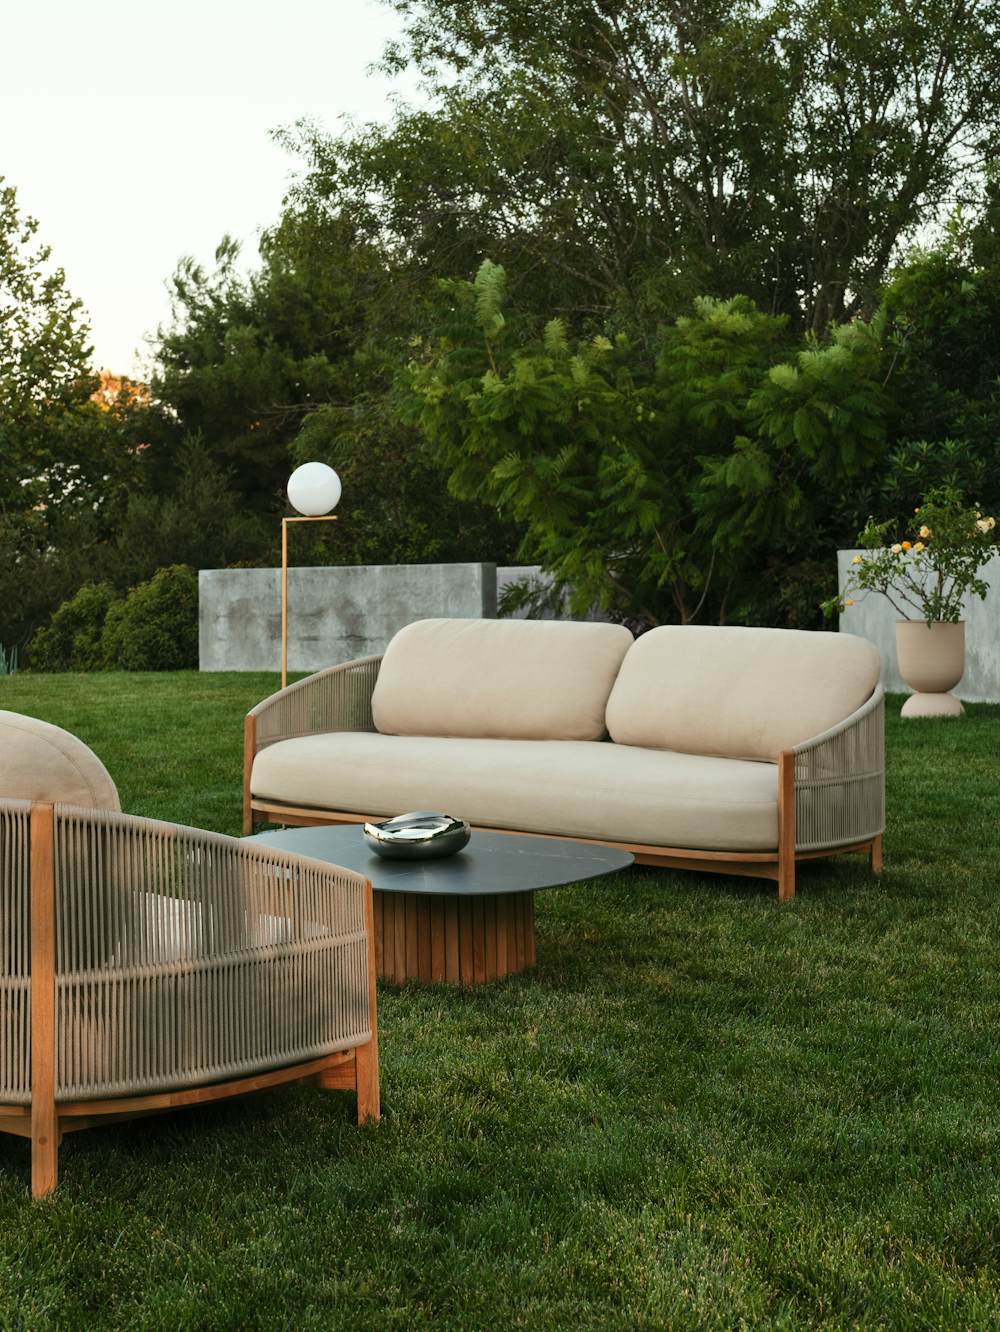 Softlands Outdoor Sofa and Coffee Table